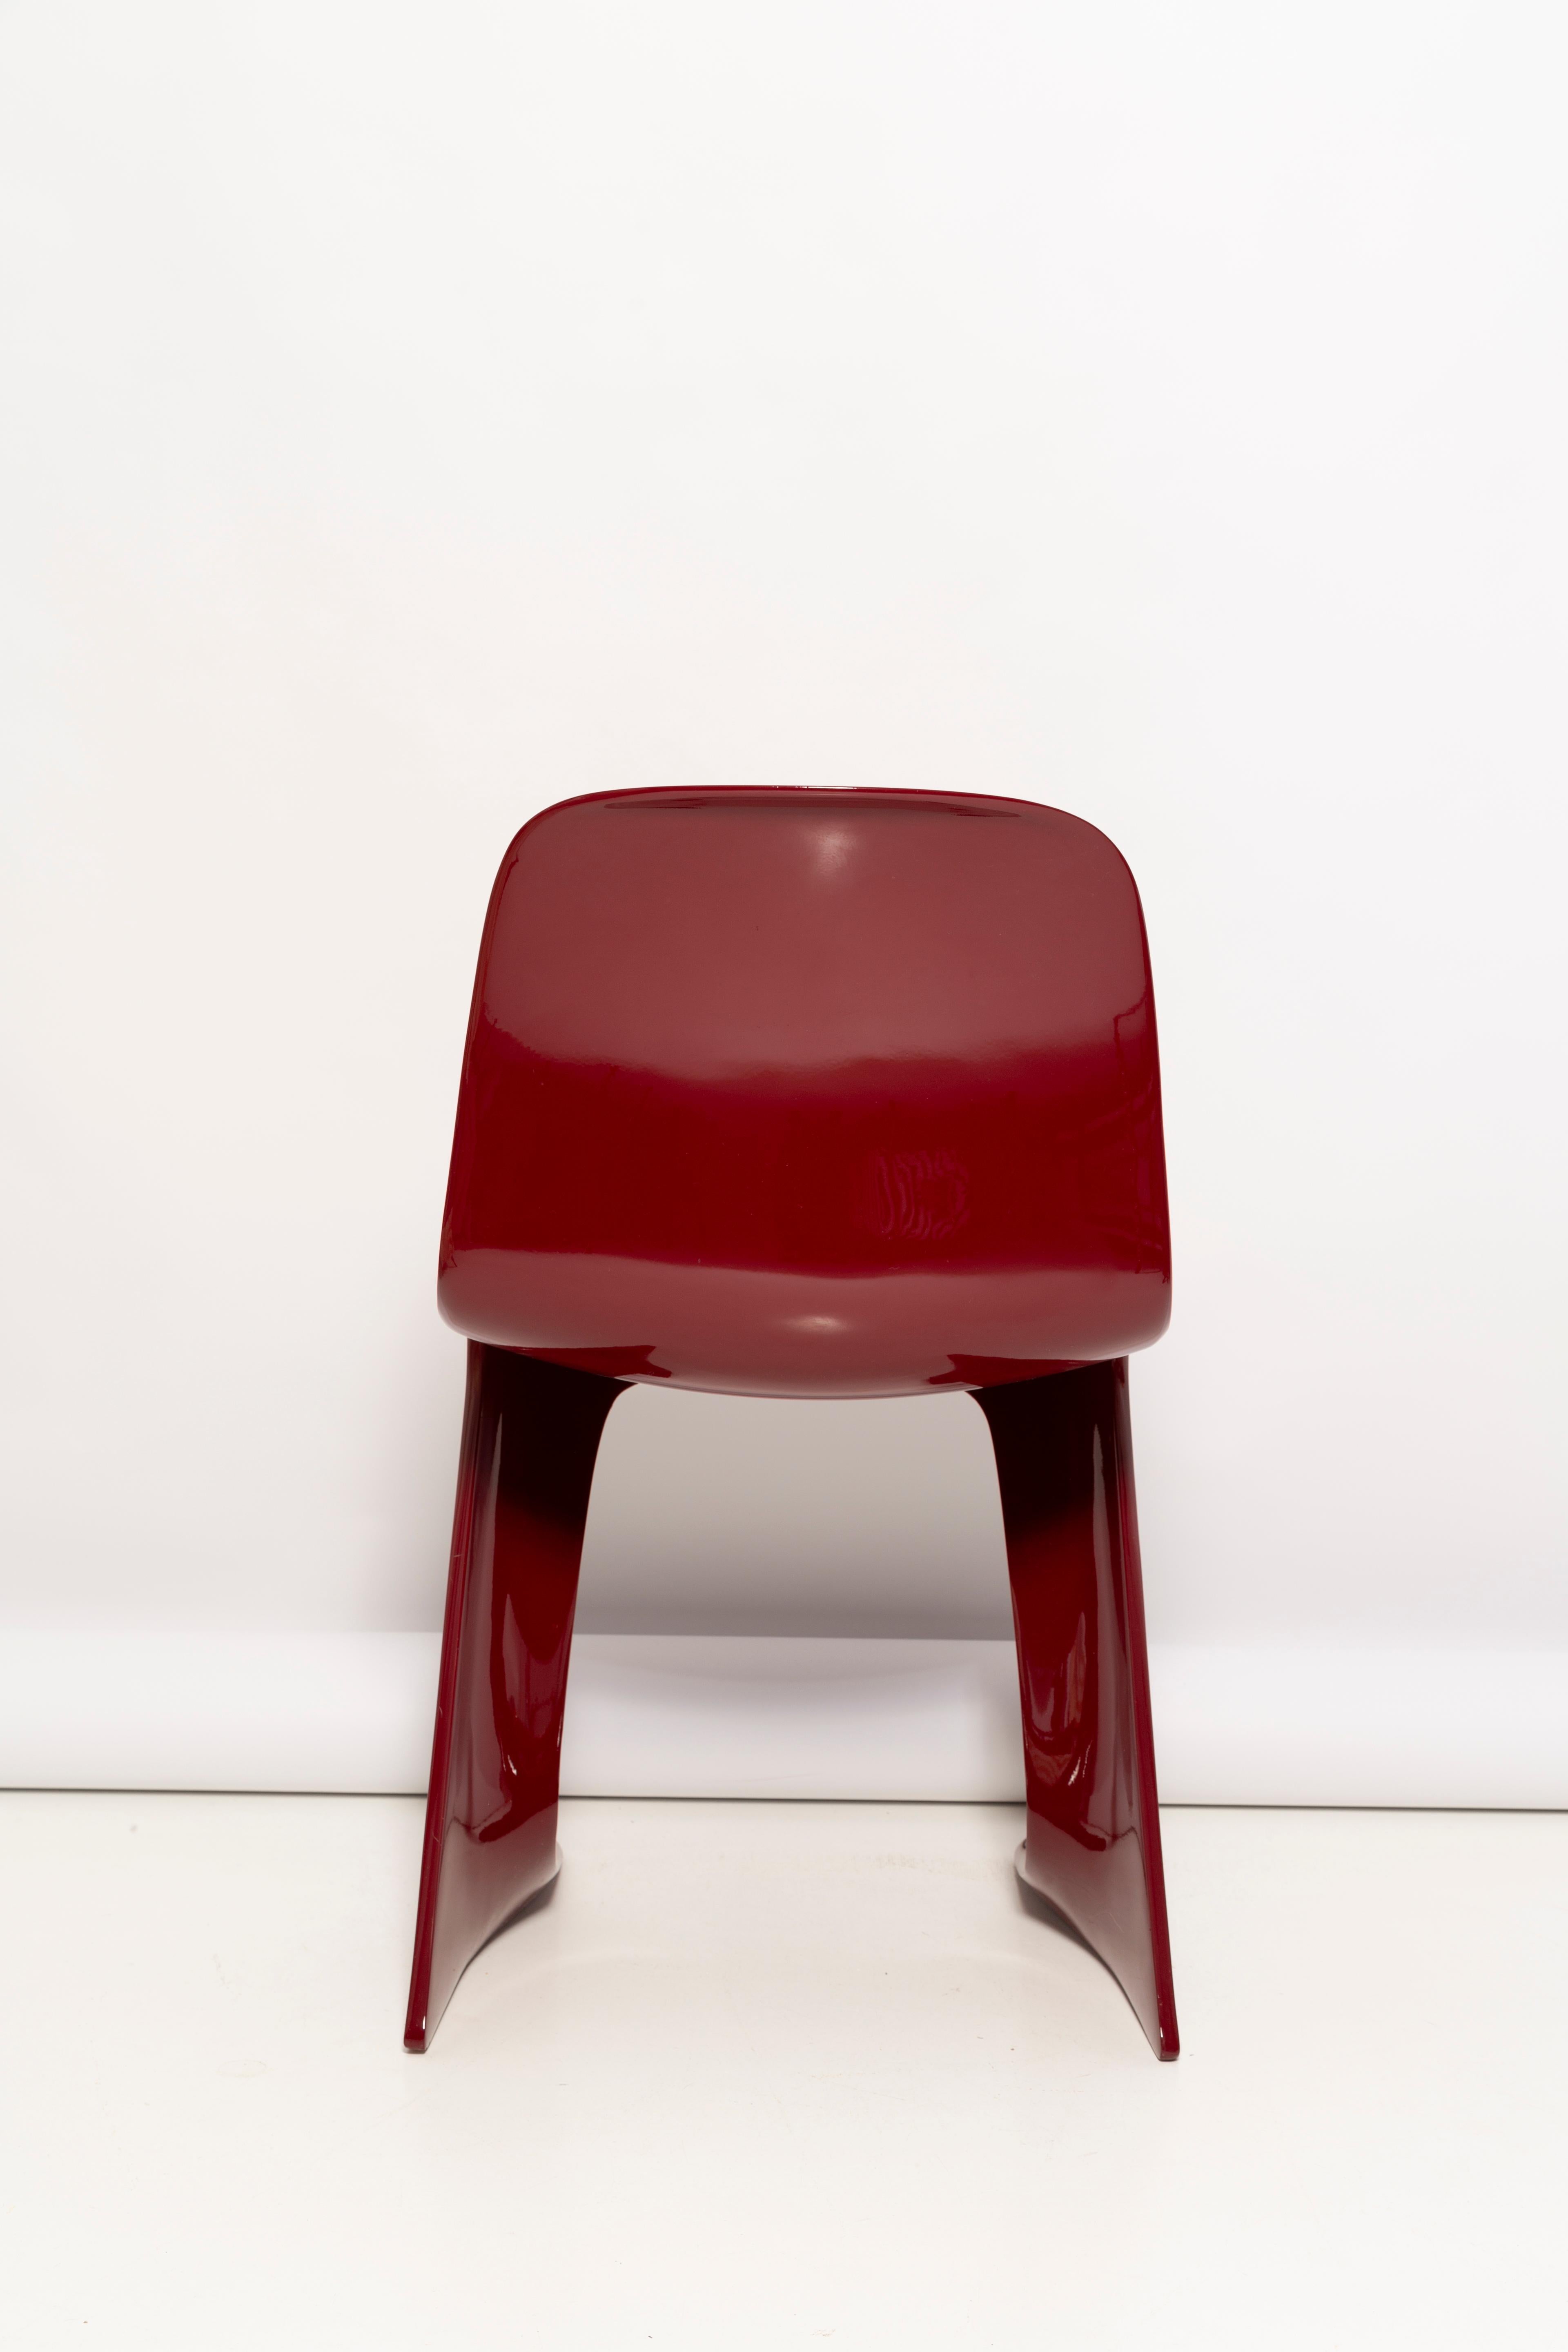 Set of Six Dark Red Wine Kangaroo Chairs Designed by Ernst Moeckl, Germany, 1968 For Sale 2